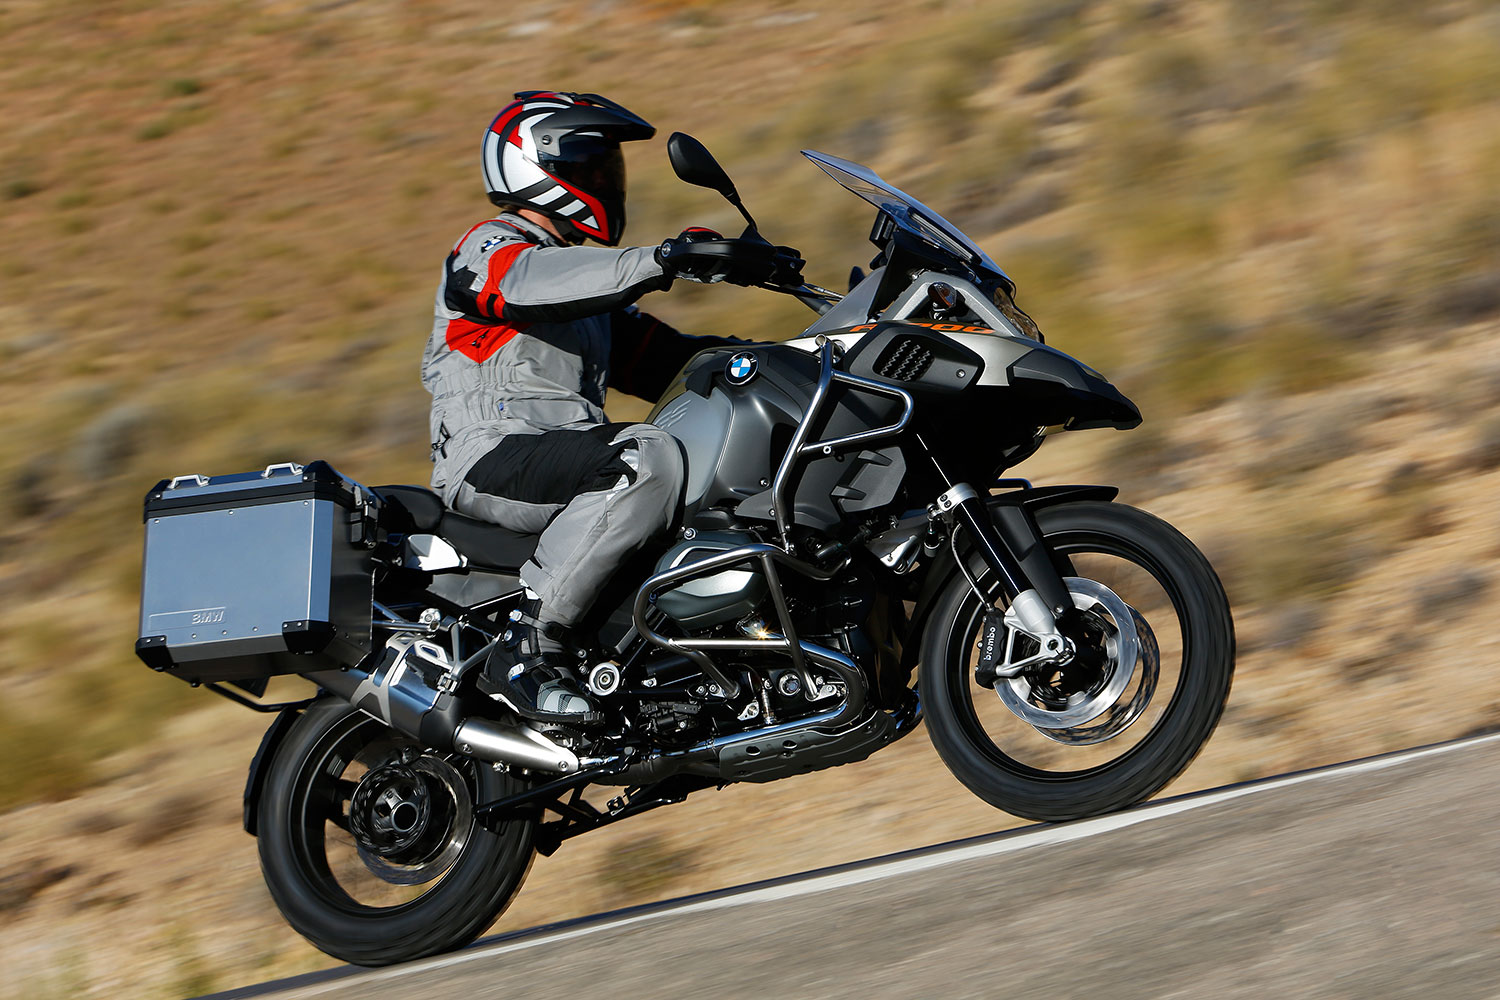 The new BMW R 1200 GS Adventure LC 2014 New model of the BMW GS-series